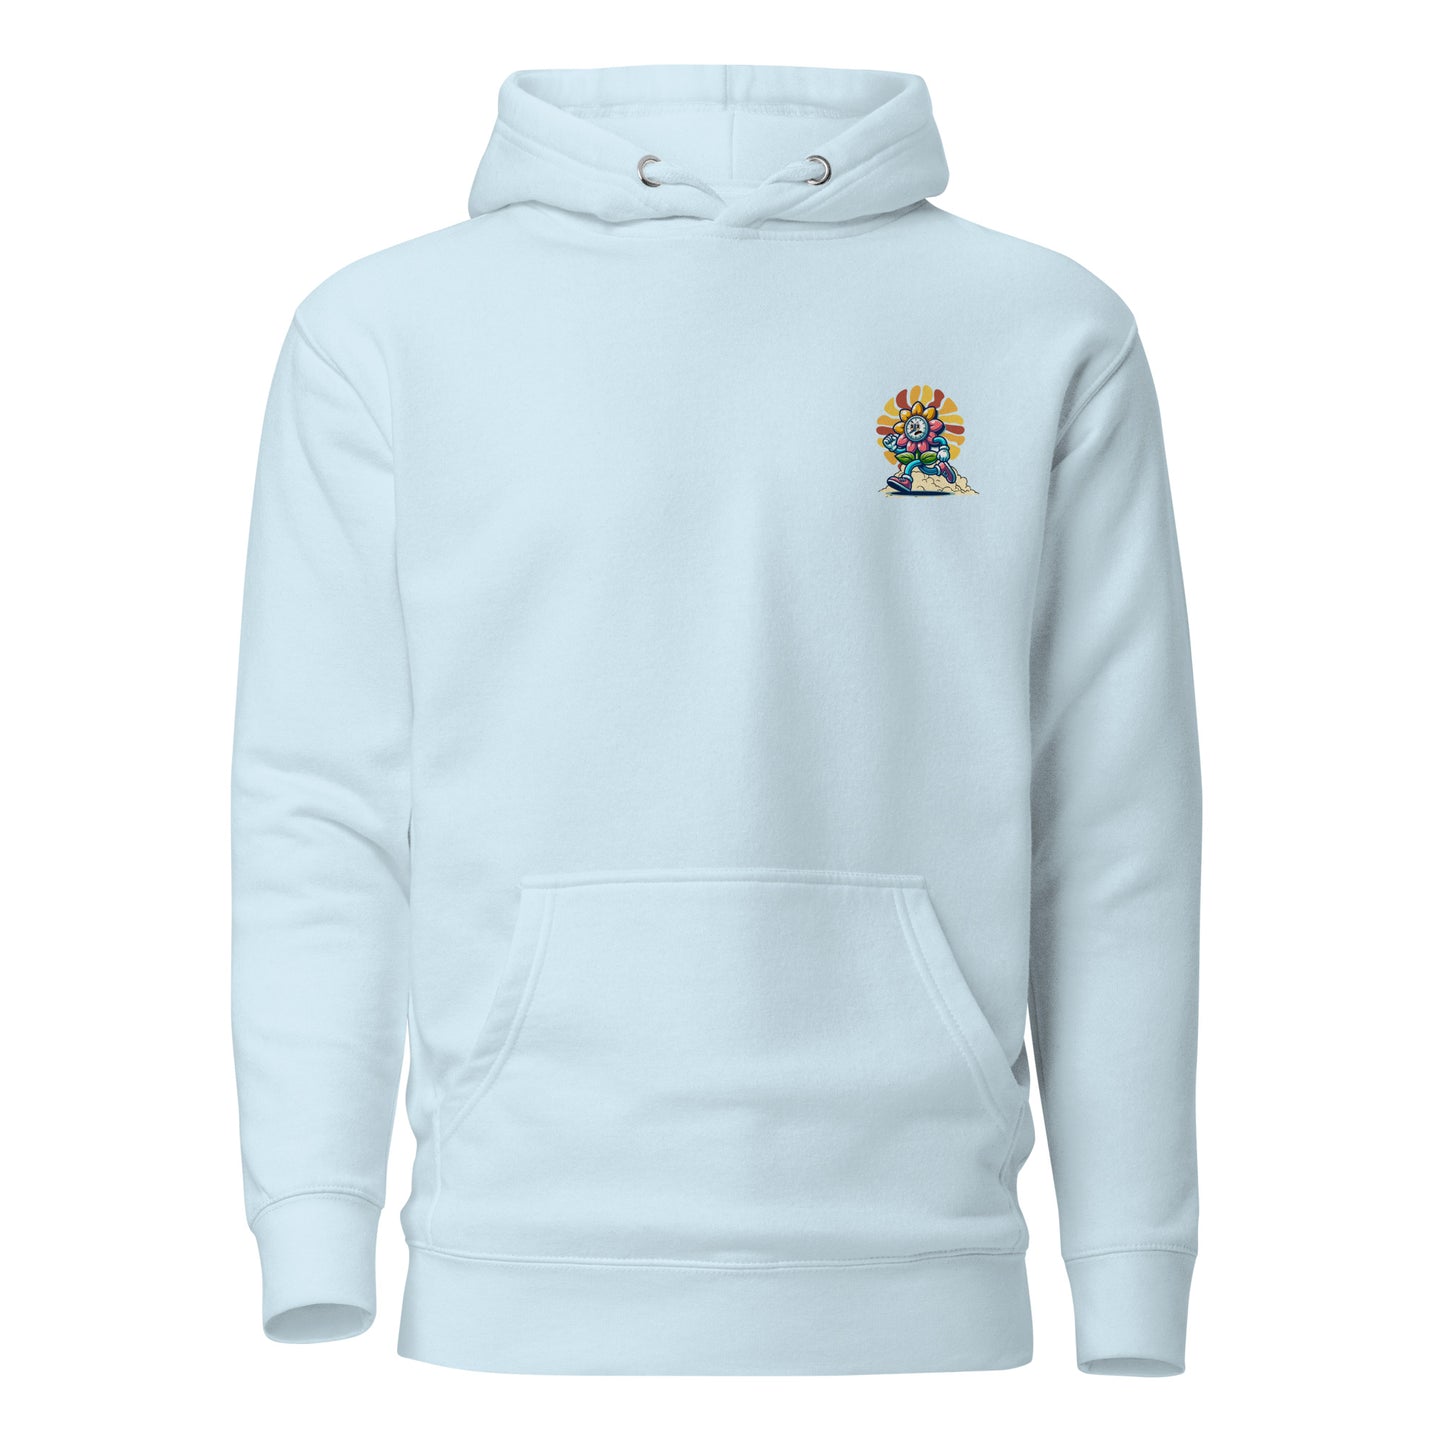 Every second counts in the pursuit of greatness Hoodie